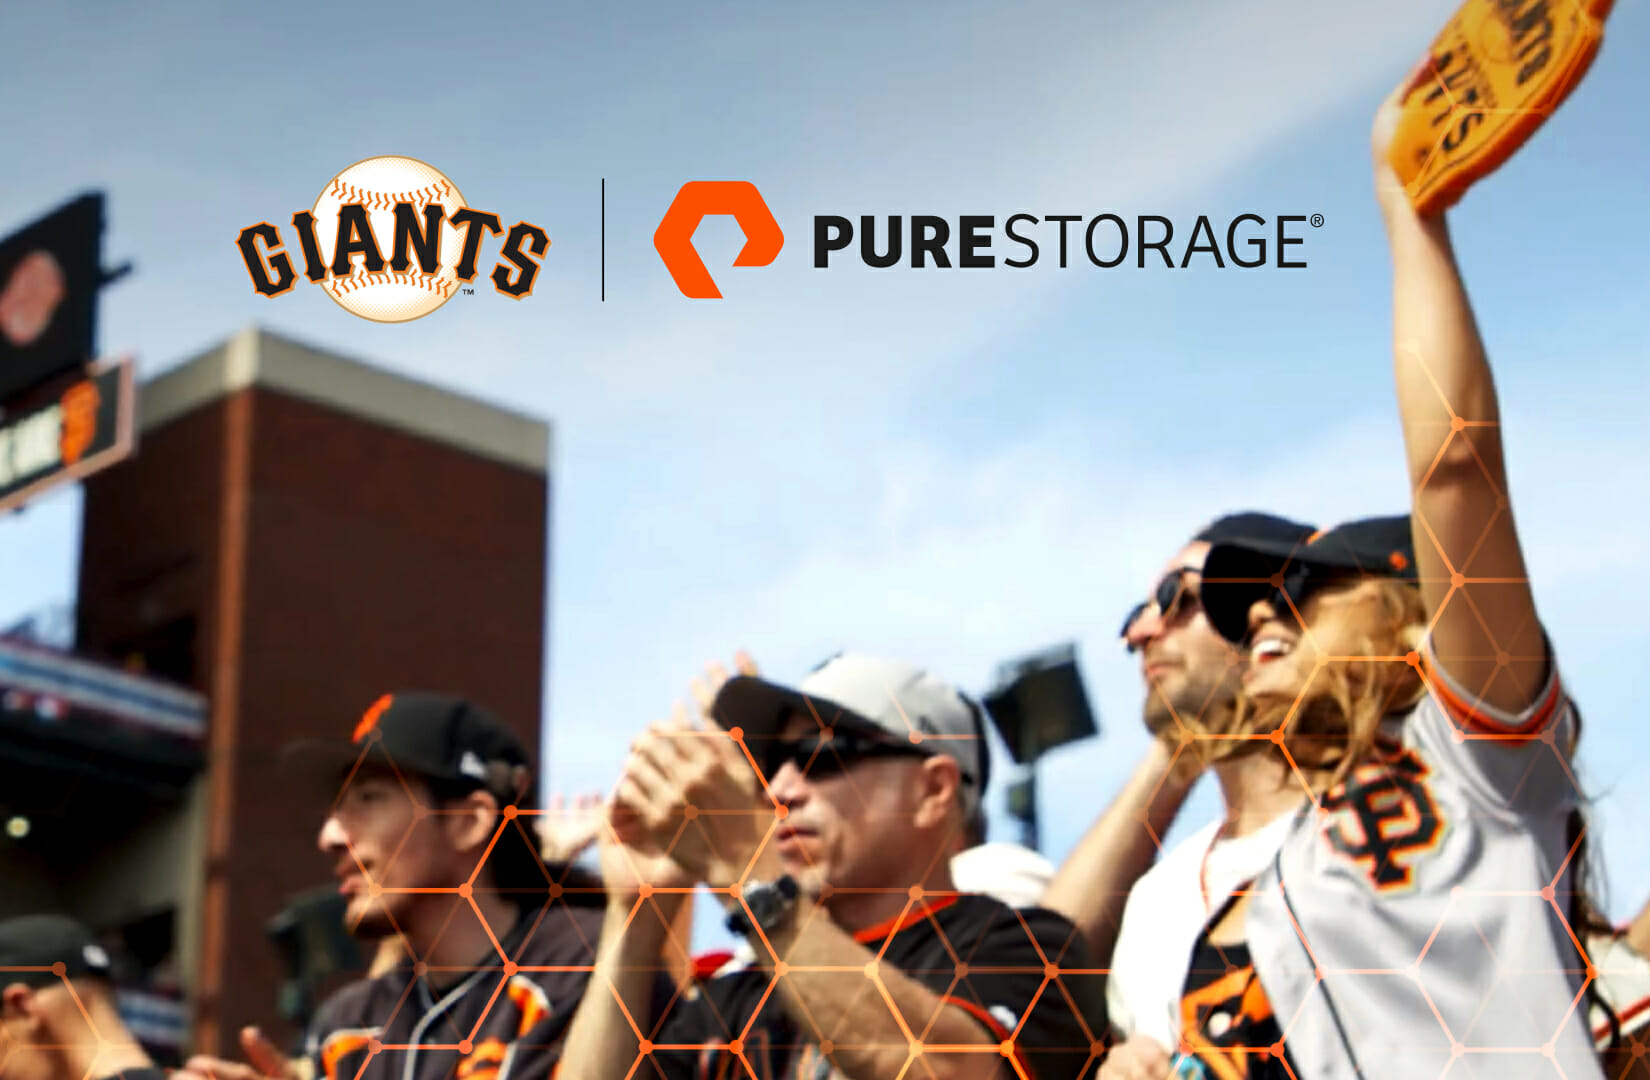 How the Giants Use Data Analytics for Partnerships and Marketing